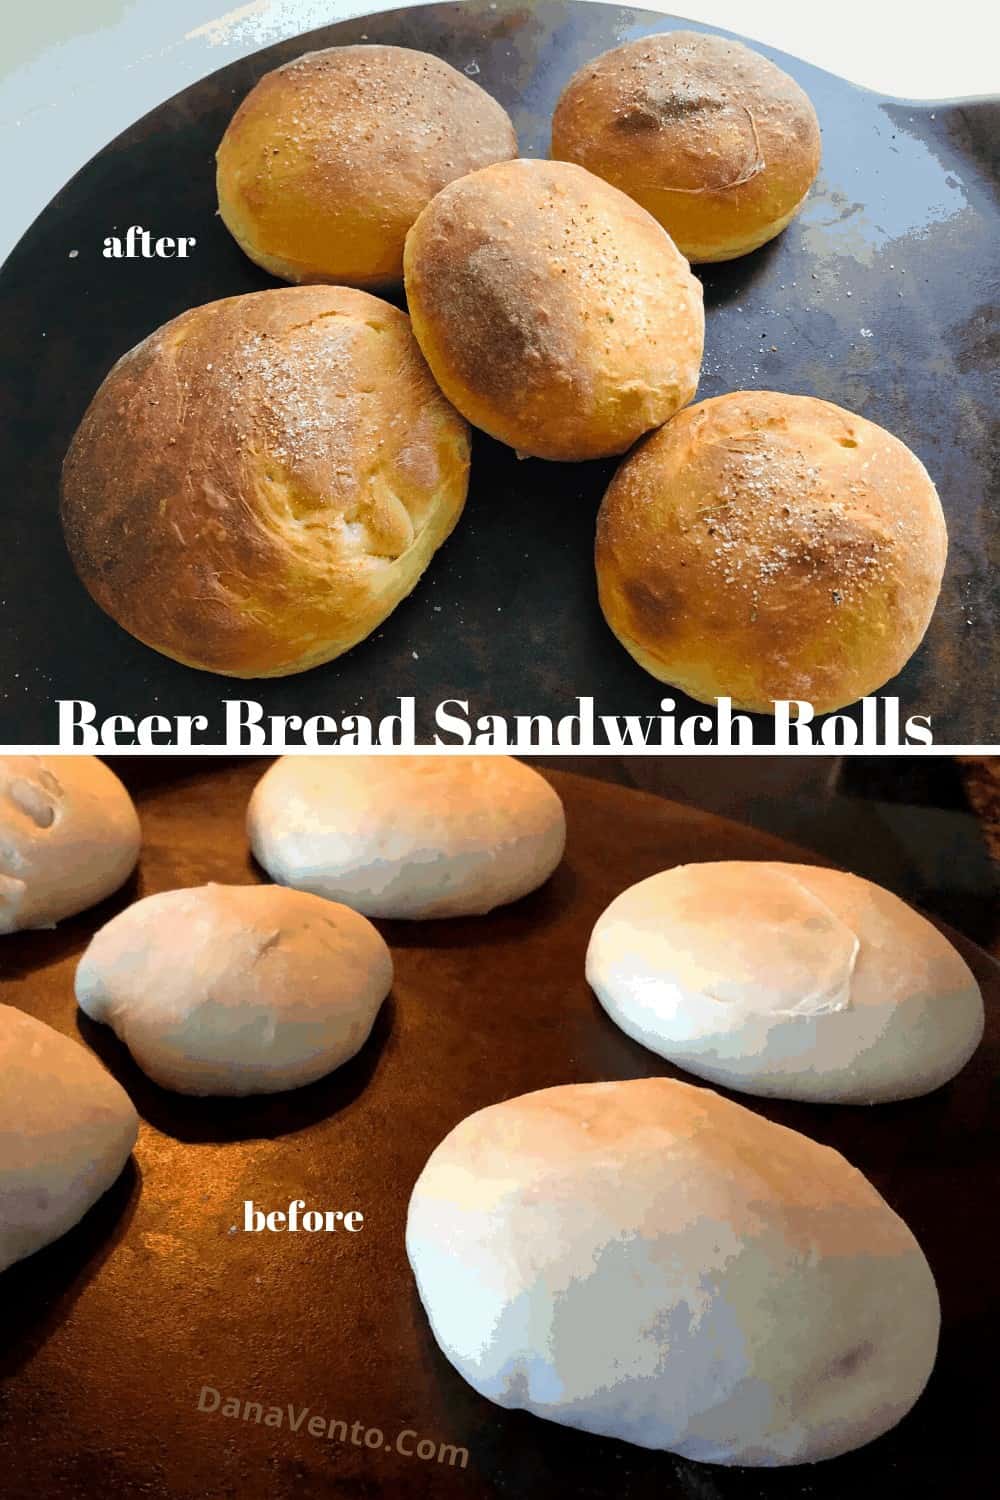 rolls before and after baking